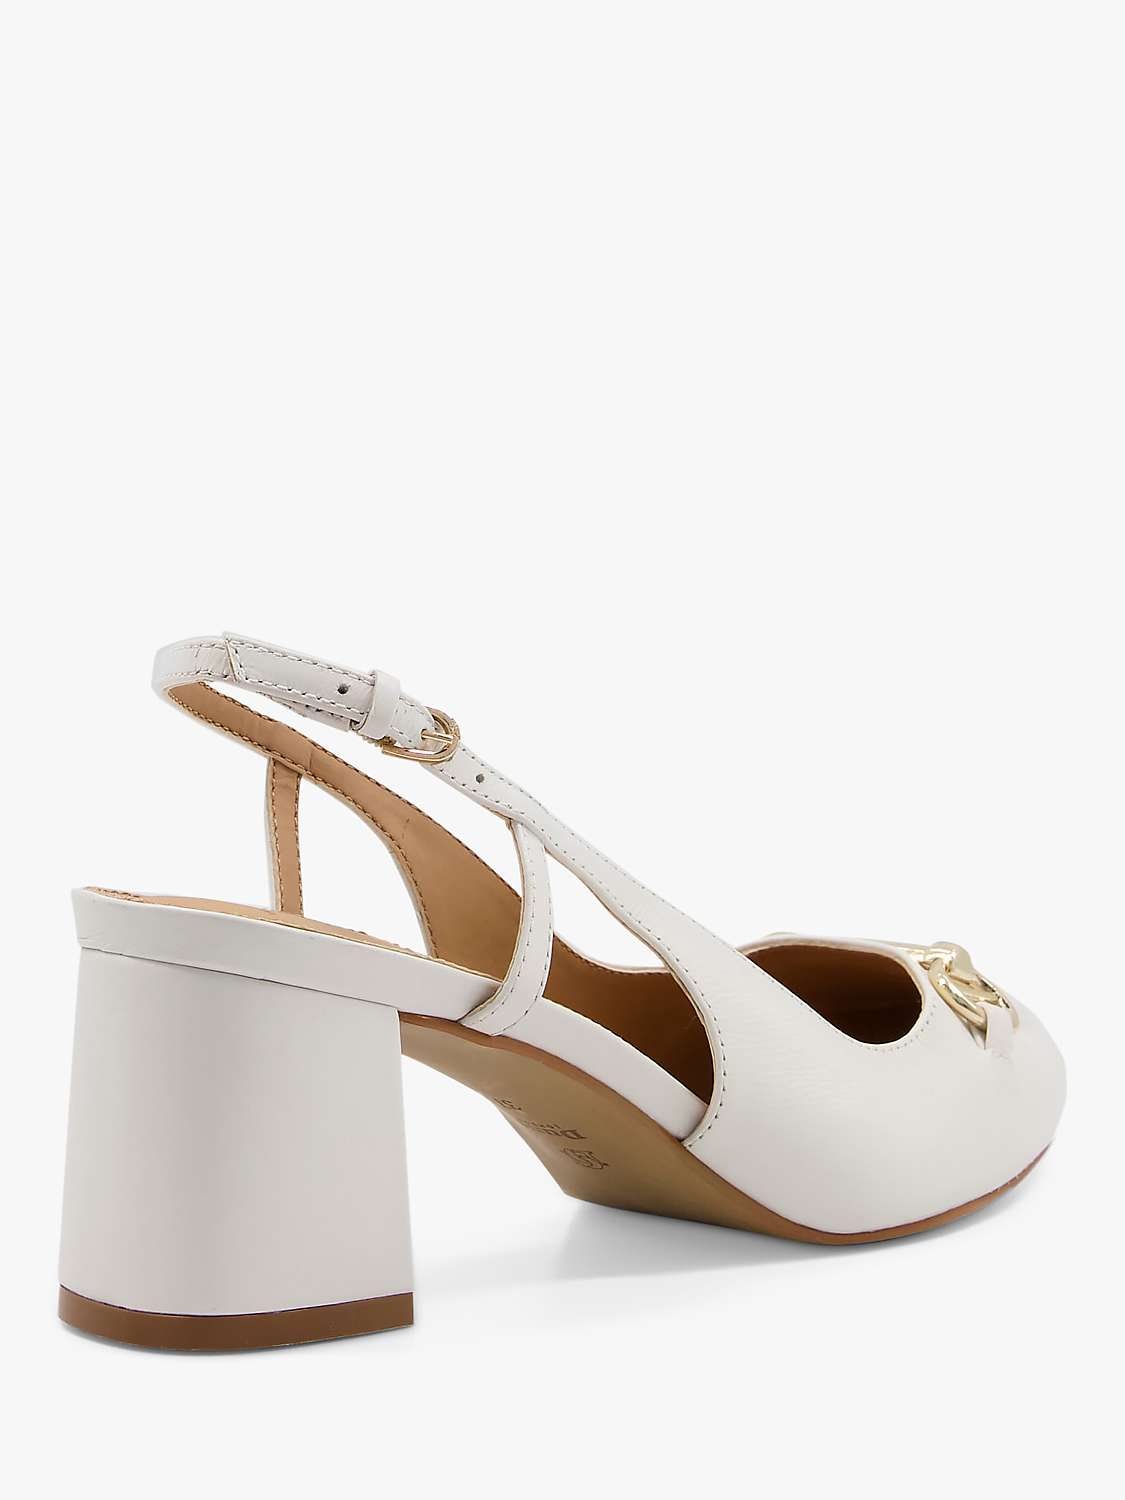 Buy Dune Wide Fit Cass Leather Block Heel Sandals, White Online at johnlewis.com